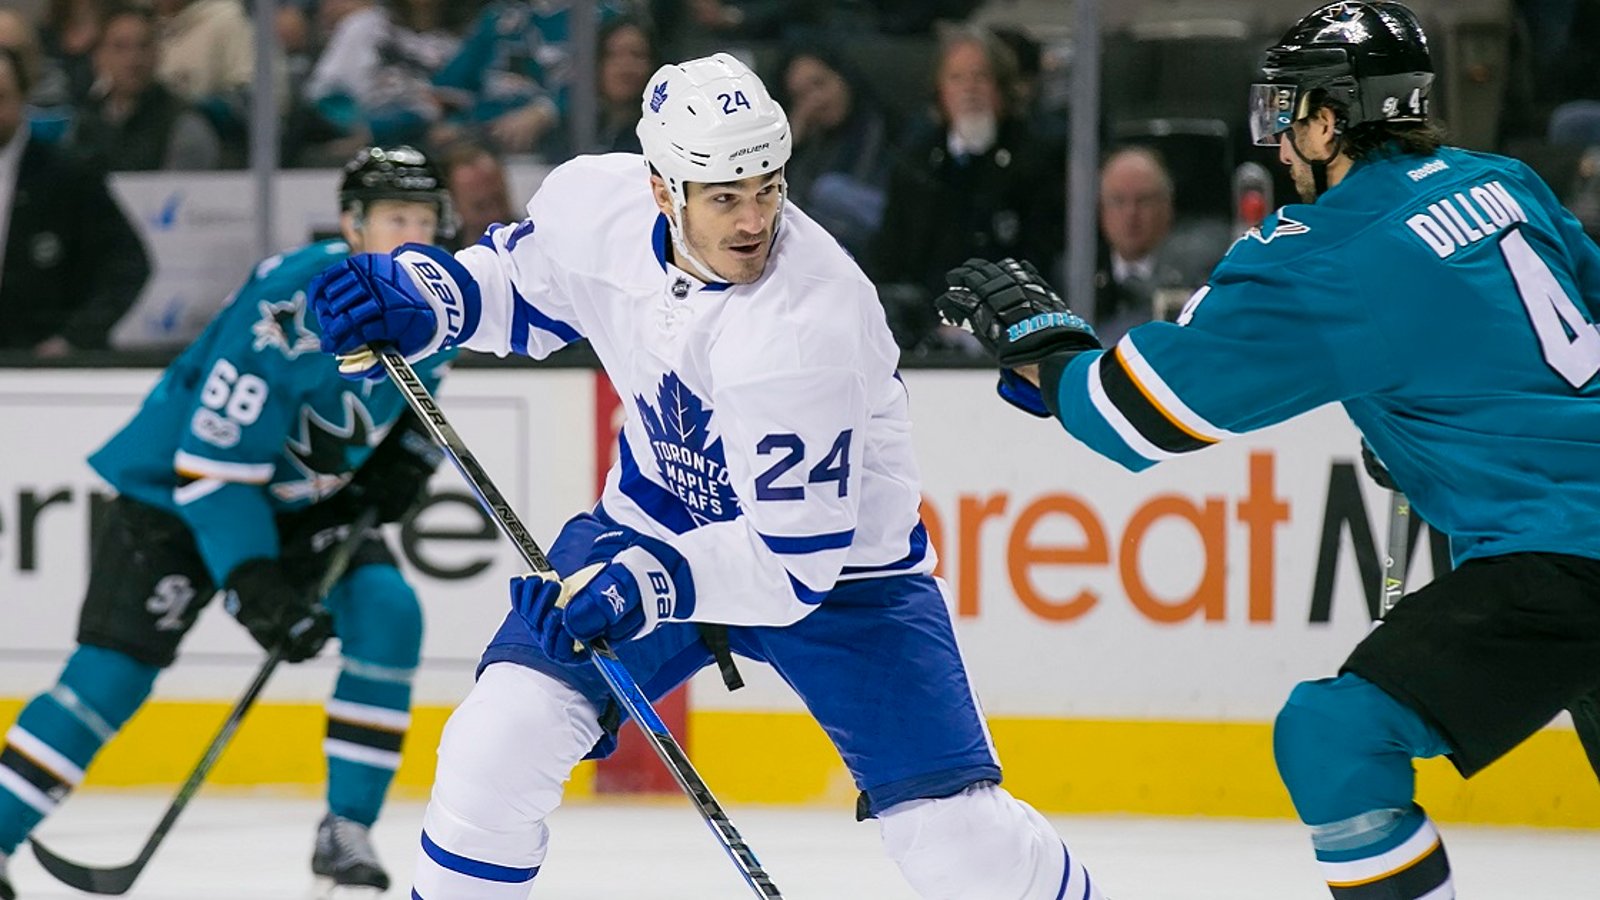 Leafs forward may have a chip on his shoulder as he faces team that traded him.